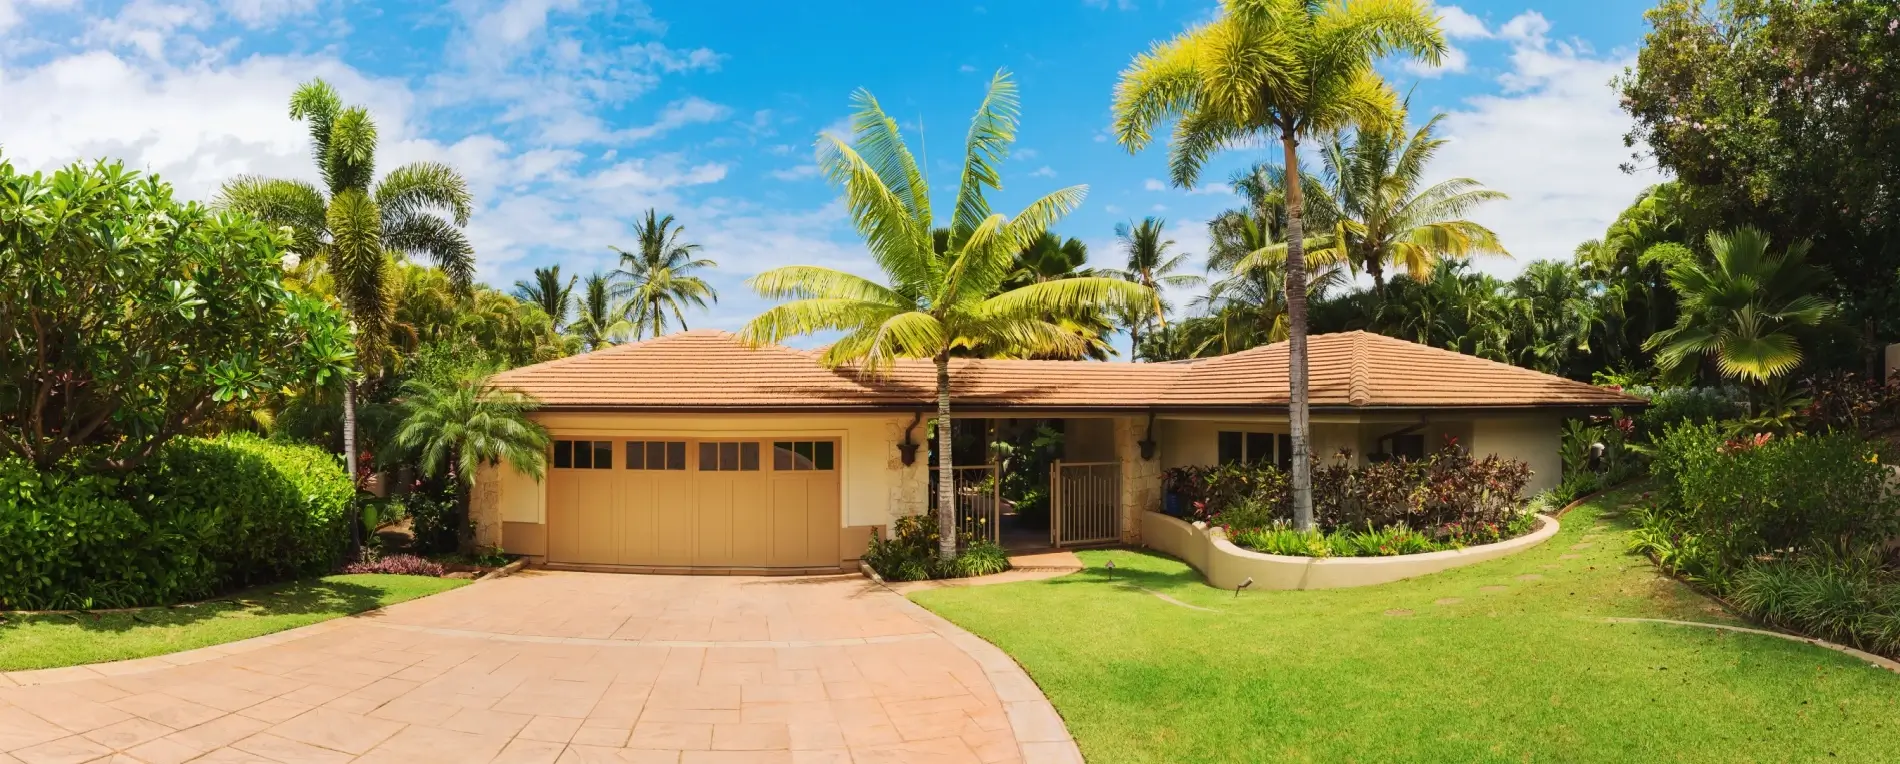 Background image for eMortgage Hawaii 763350